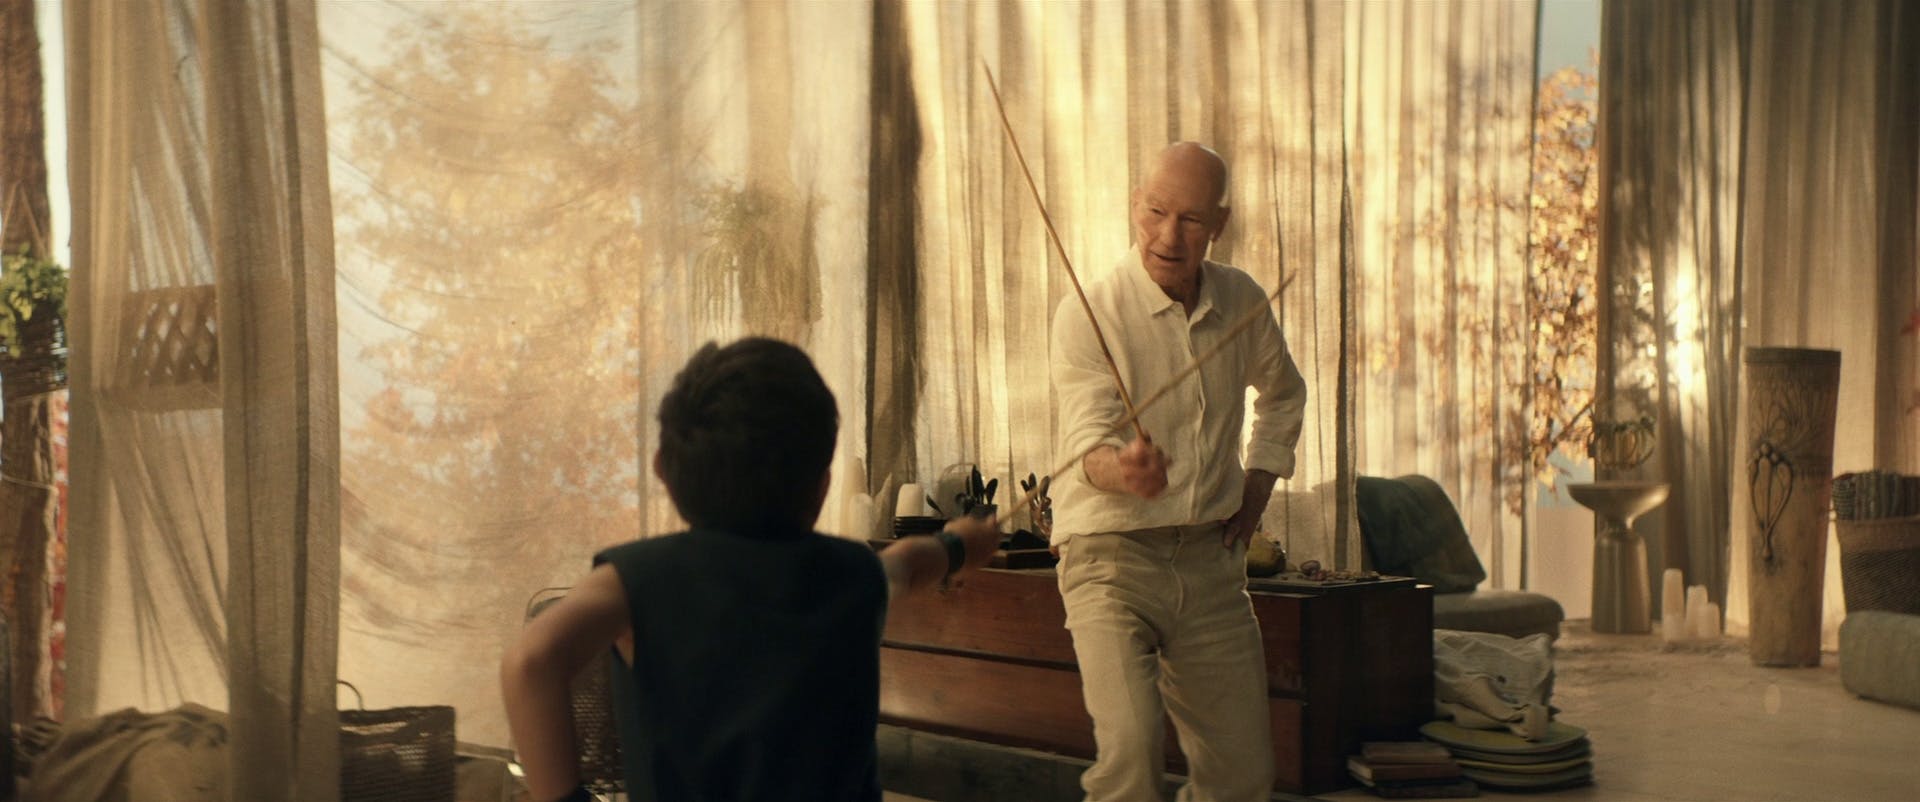 Picard, befriending a young Elnor, teaches him how to fence in 'Absolute Candor'